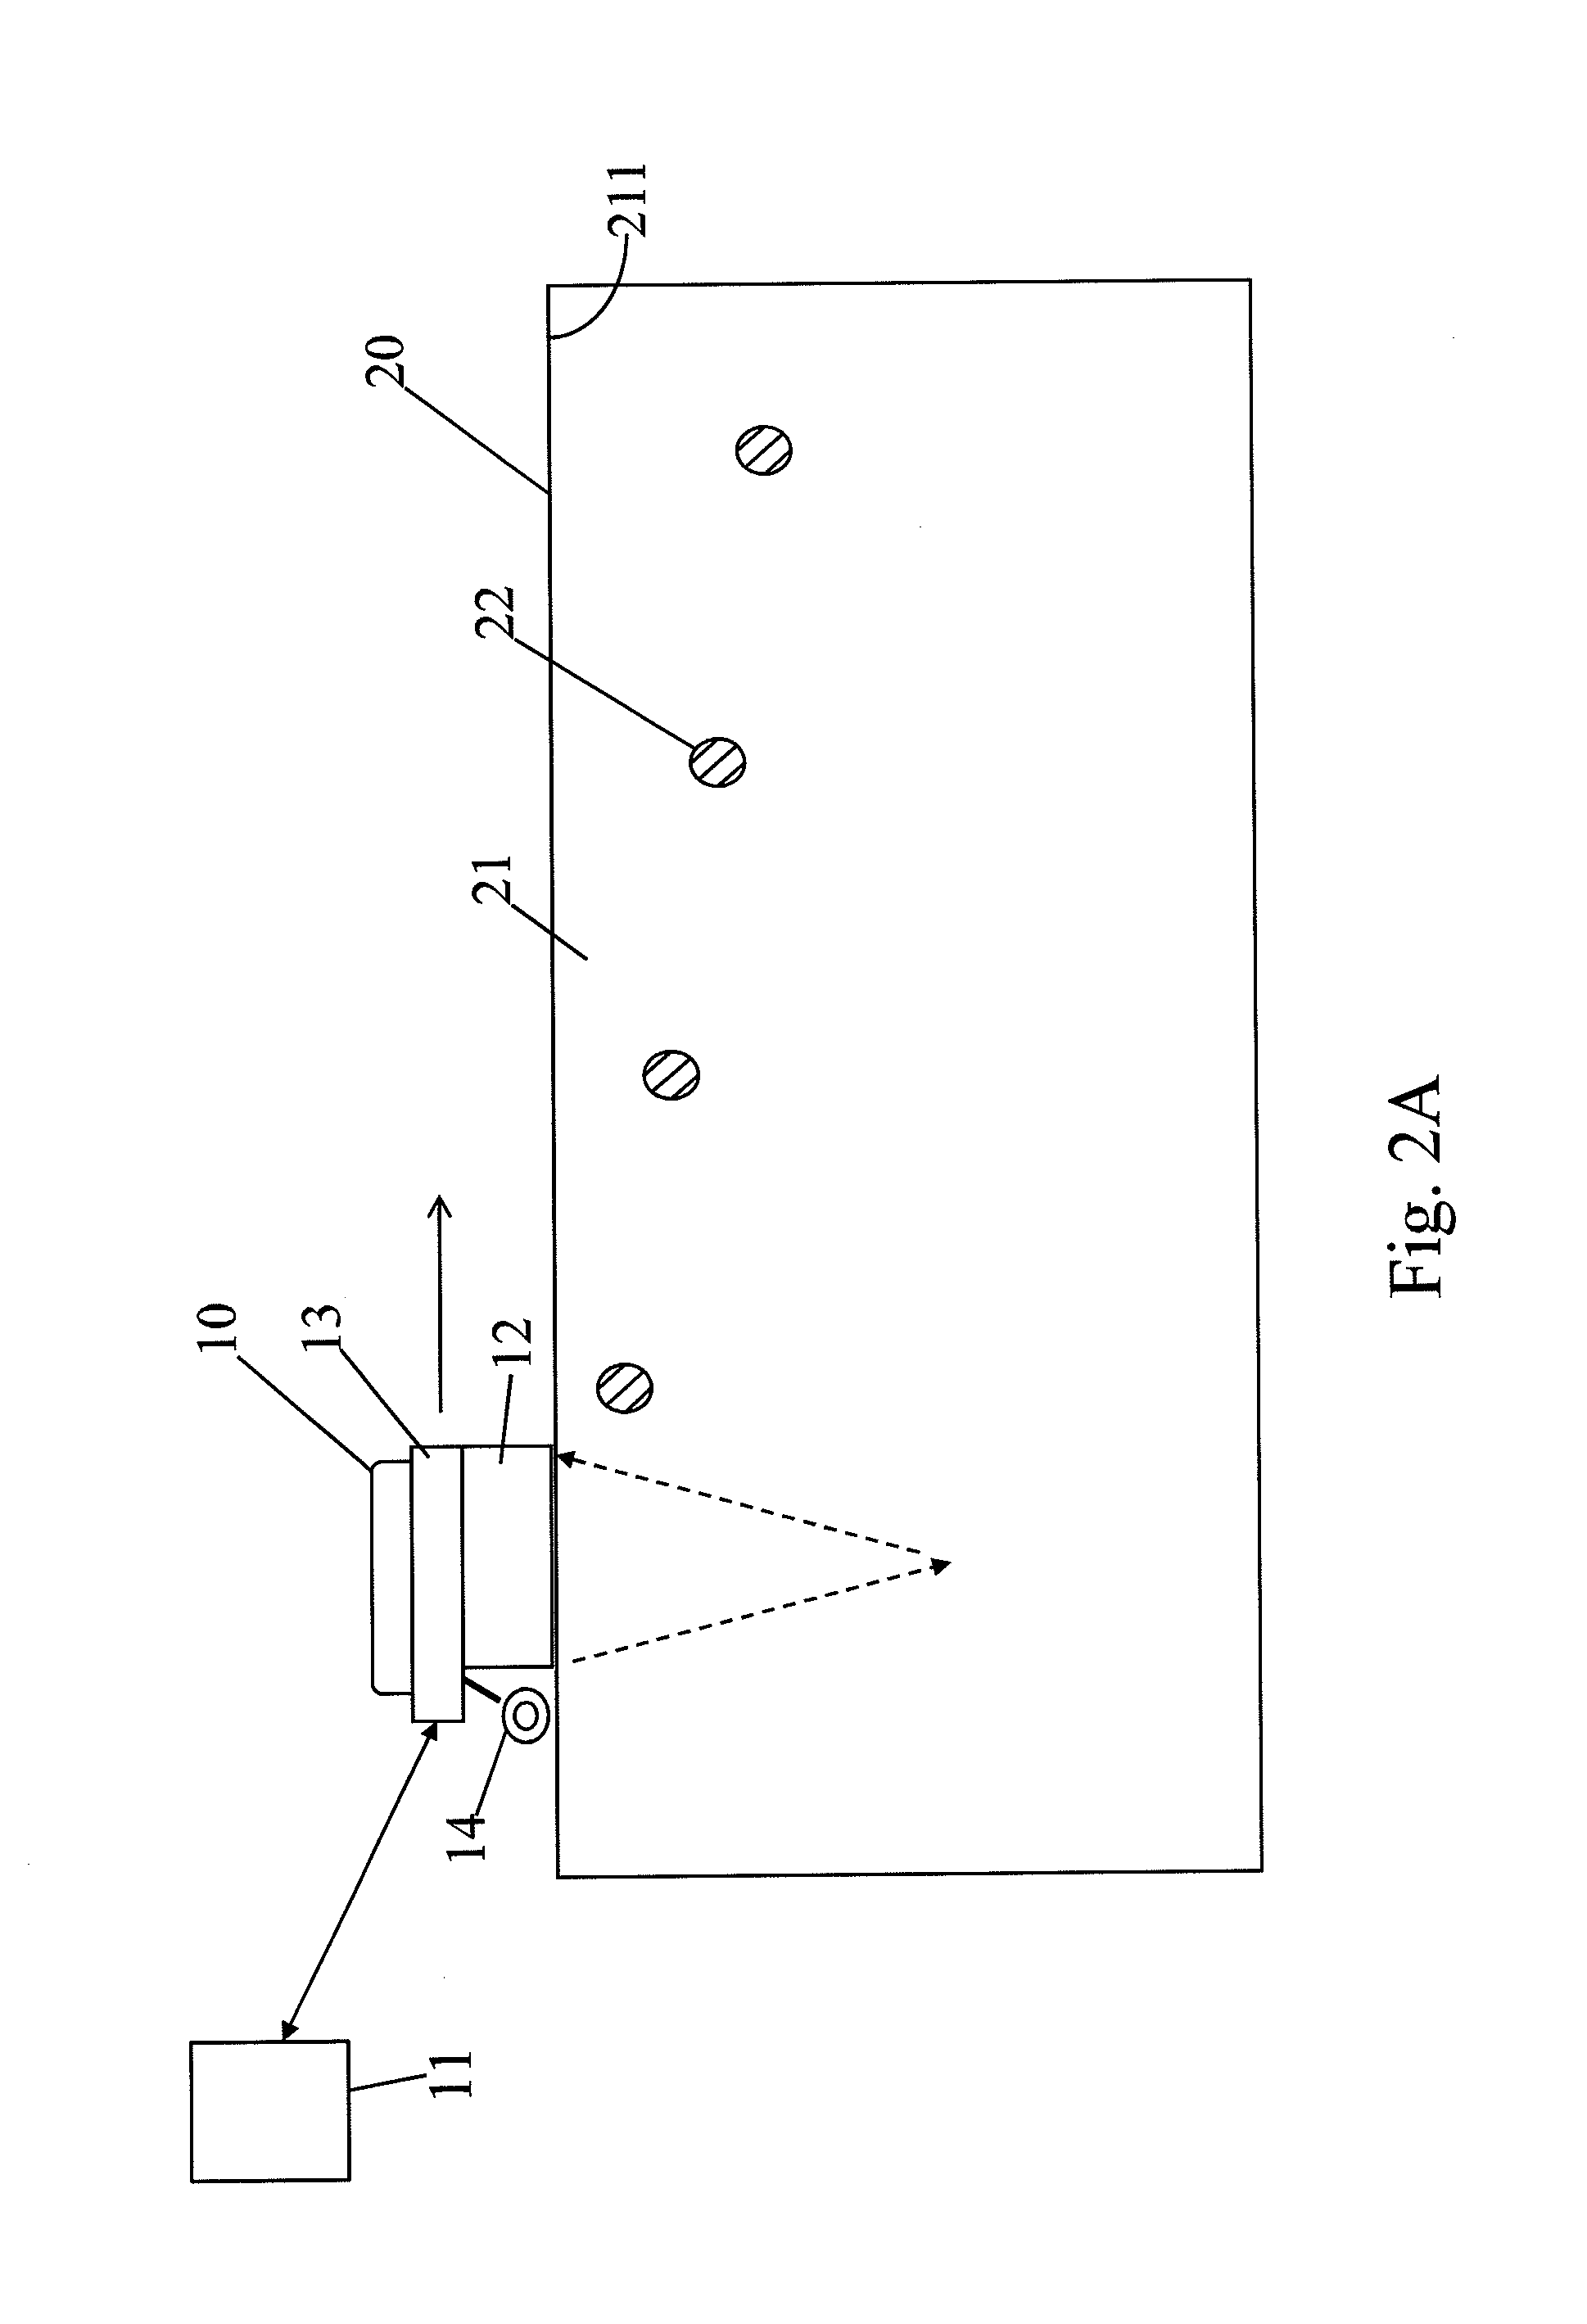 Method of using ground penetrating radar to detect corrosion of steel bars in ferroconcrete components